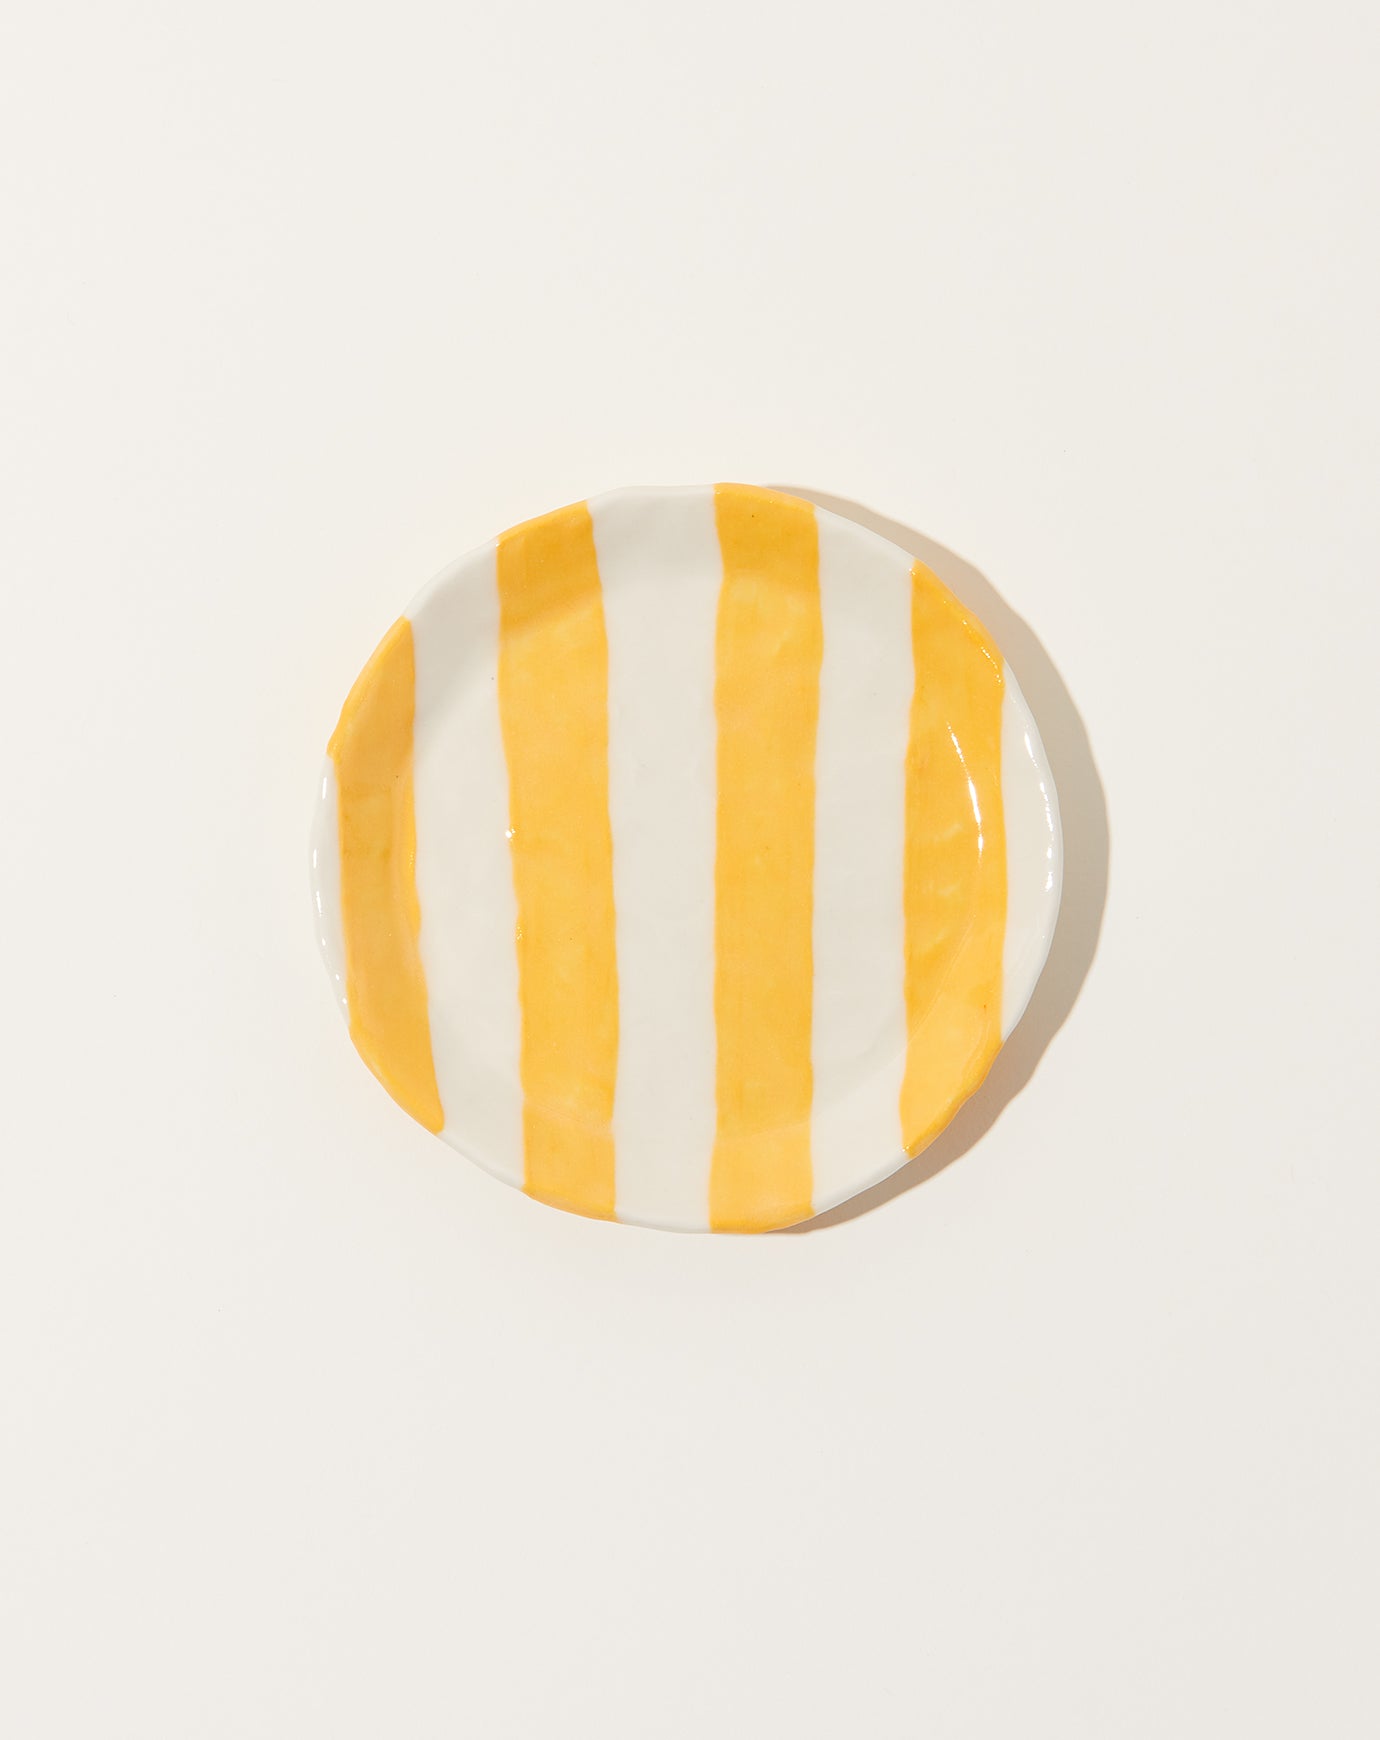 Isabel Halley Ribbon Plate in Goldenrod